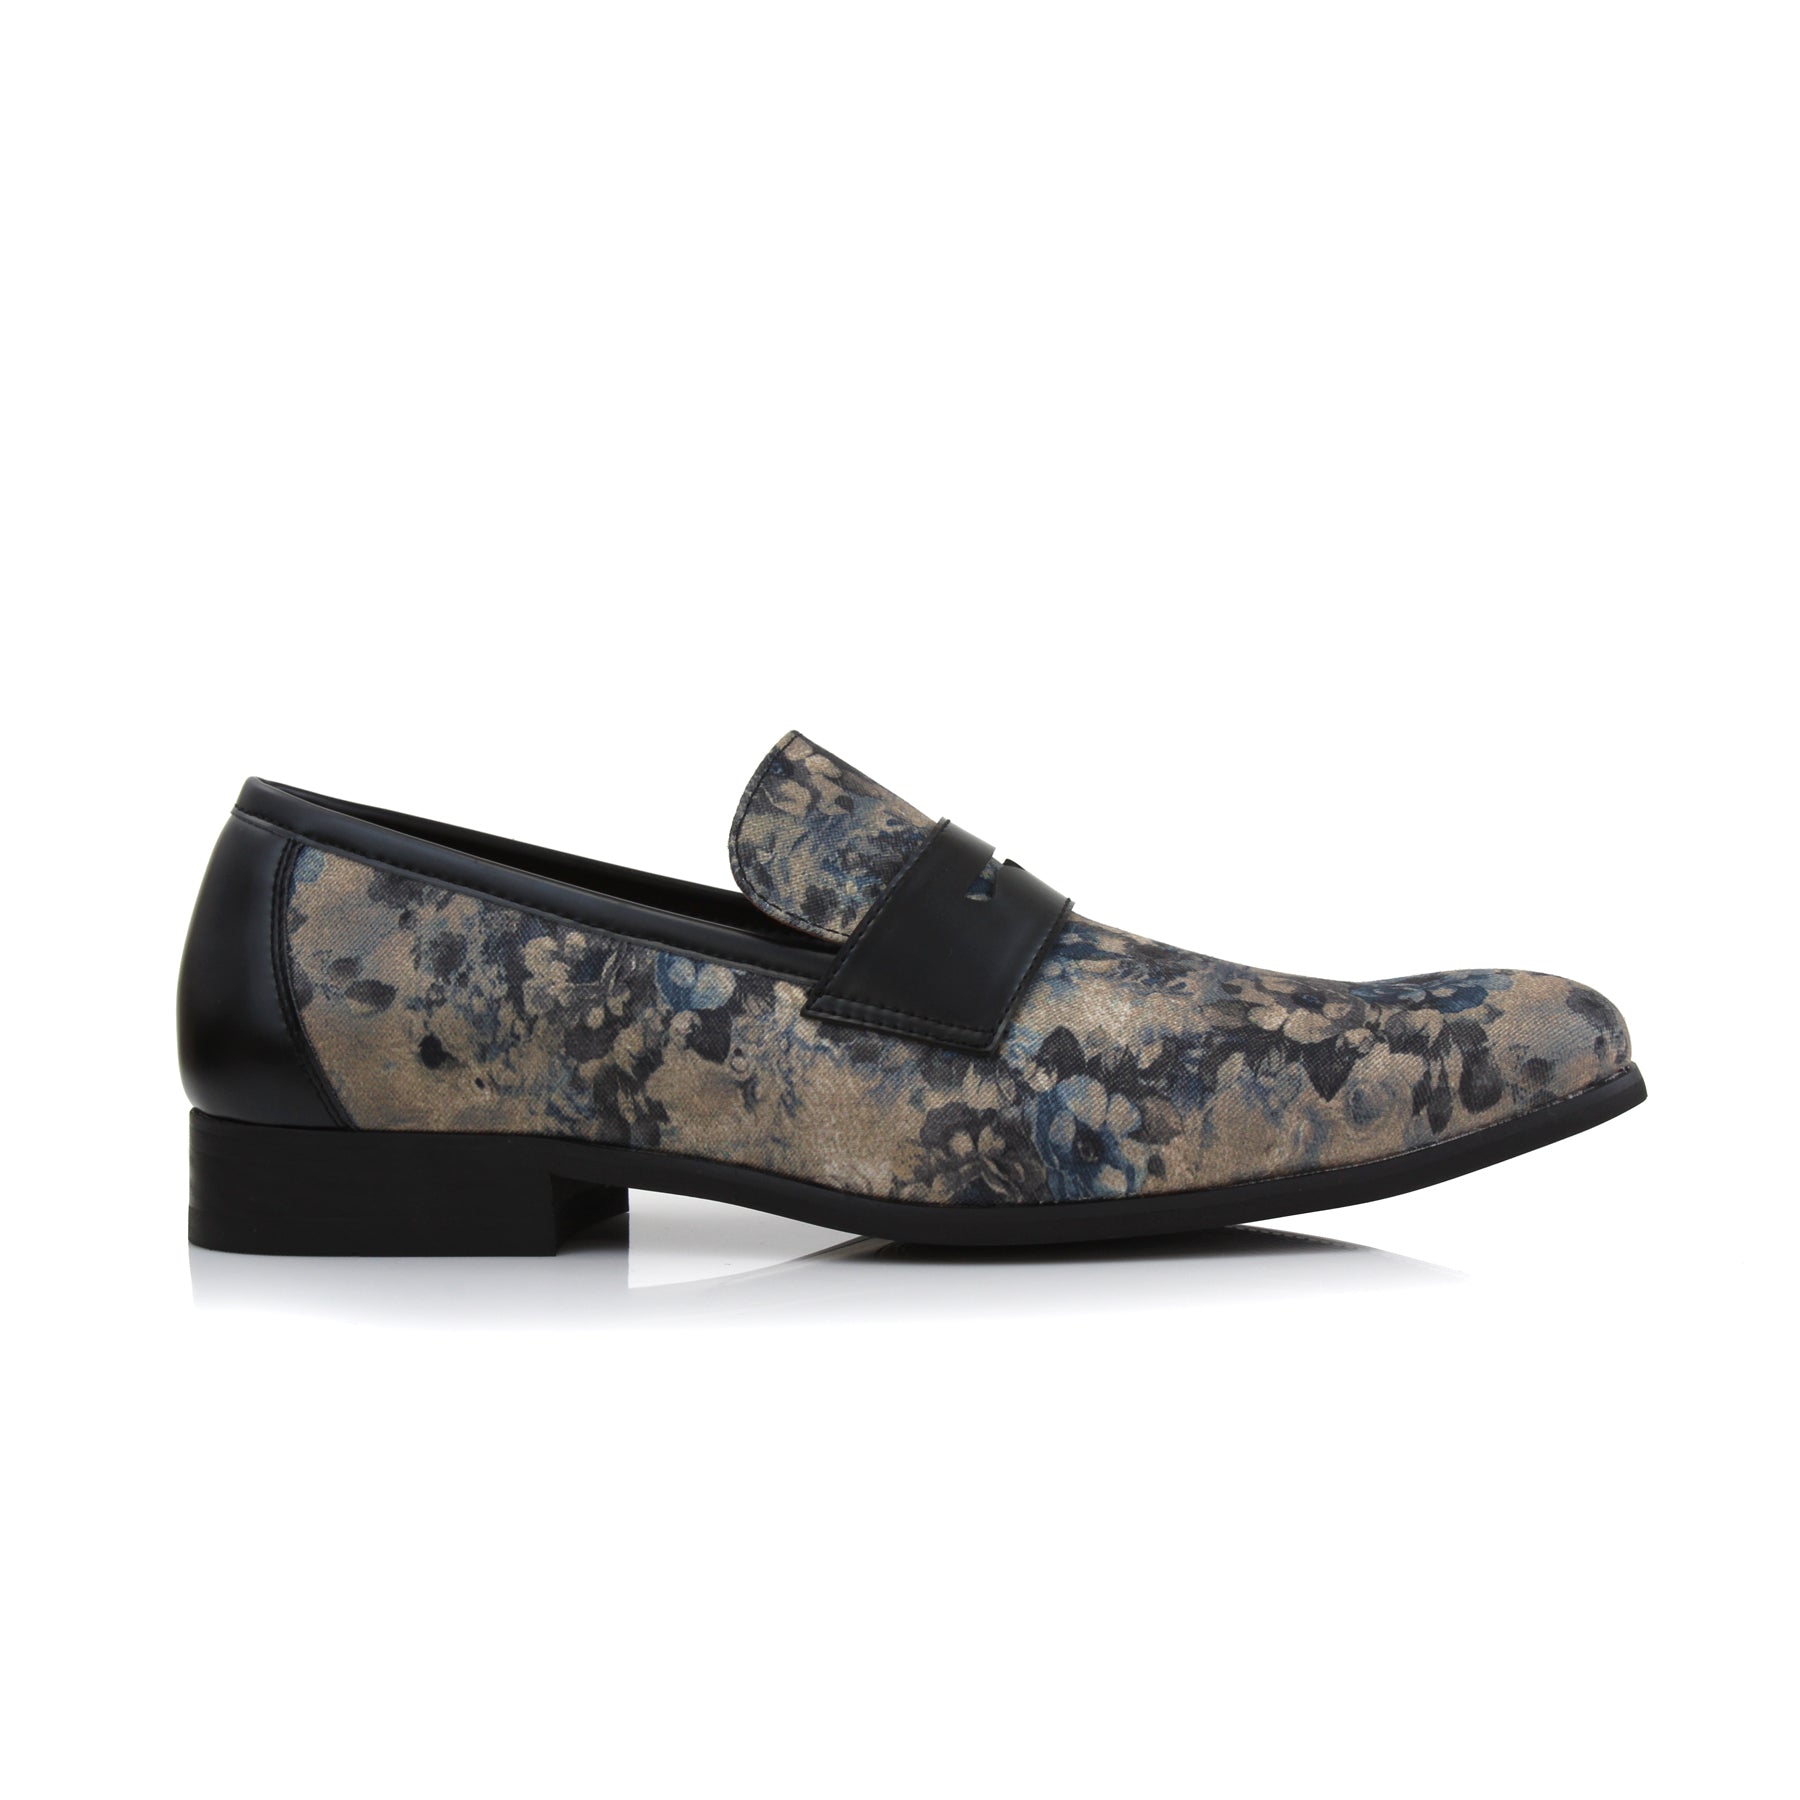 Floral Loafers | Sidney by Ferro Aldo | Conal Footwear | Outer Side Angle View